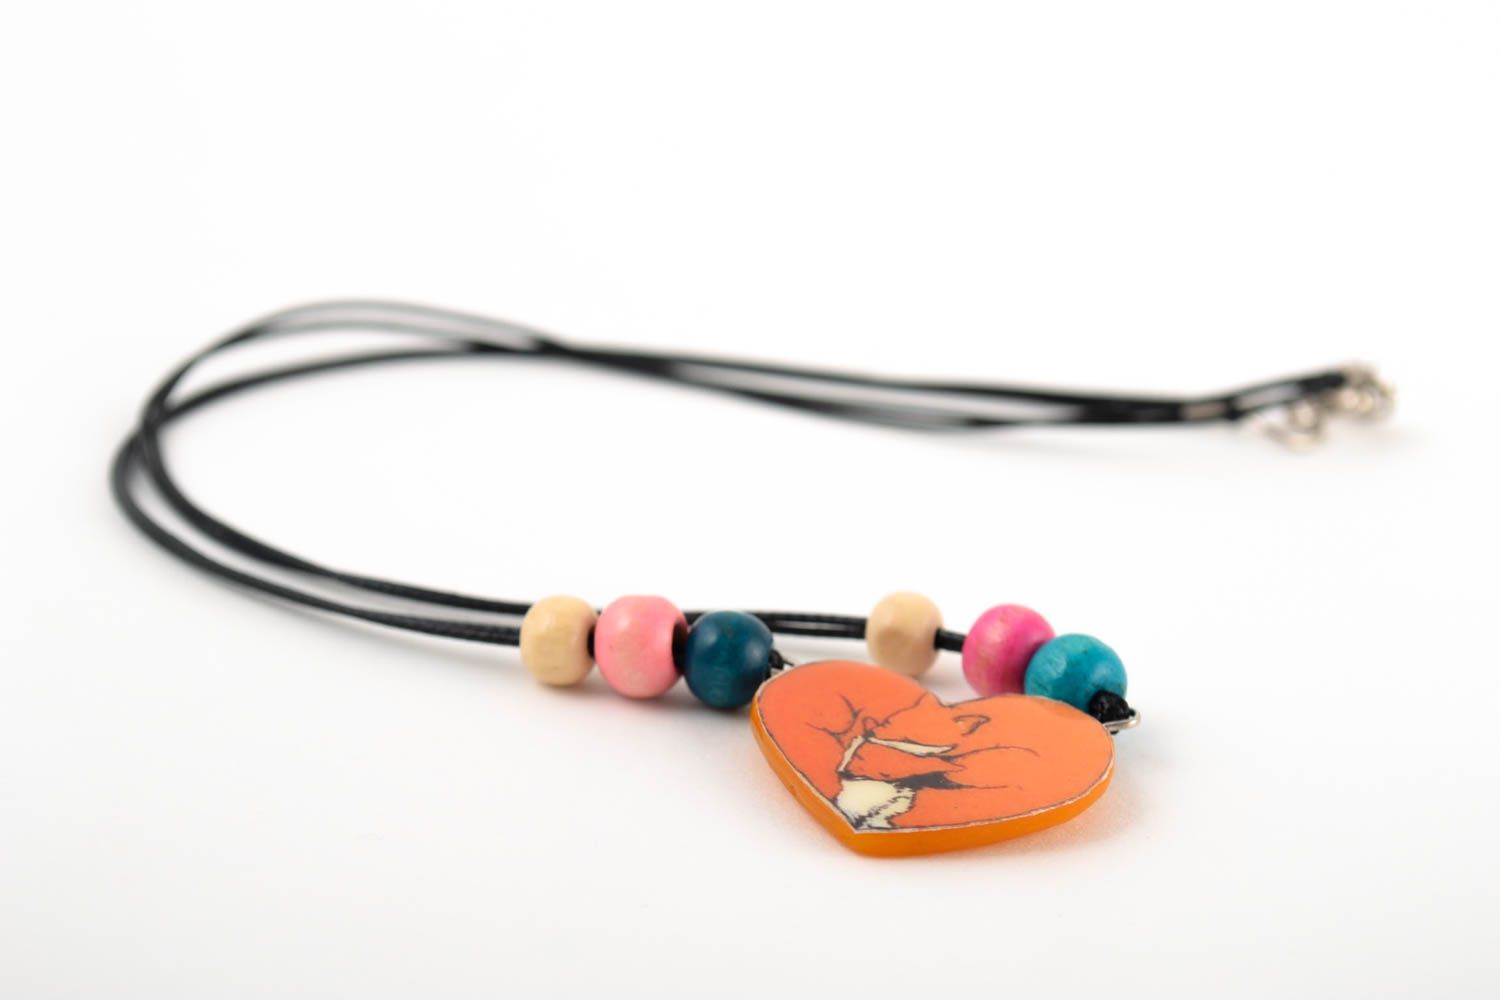 Handmade plastic pendant on cord fashion trends for girls polymer clay ideas photo 4